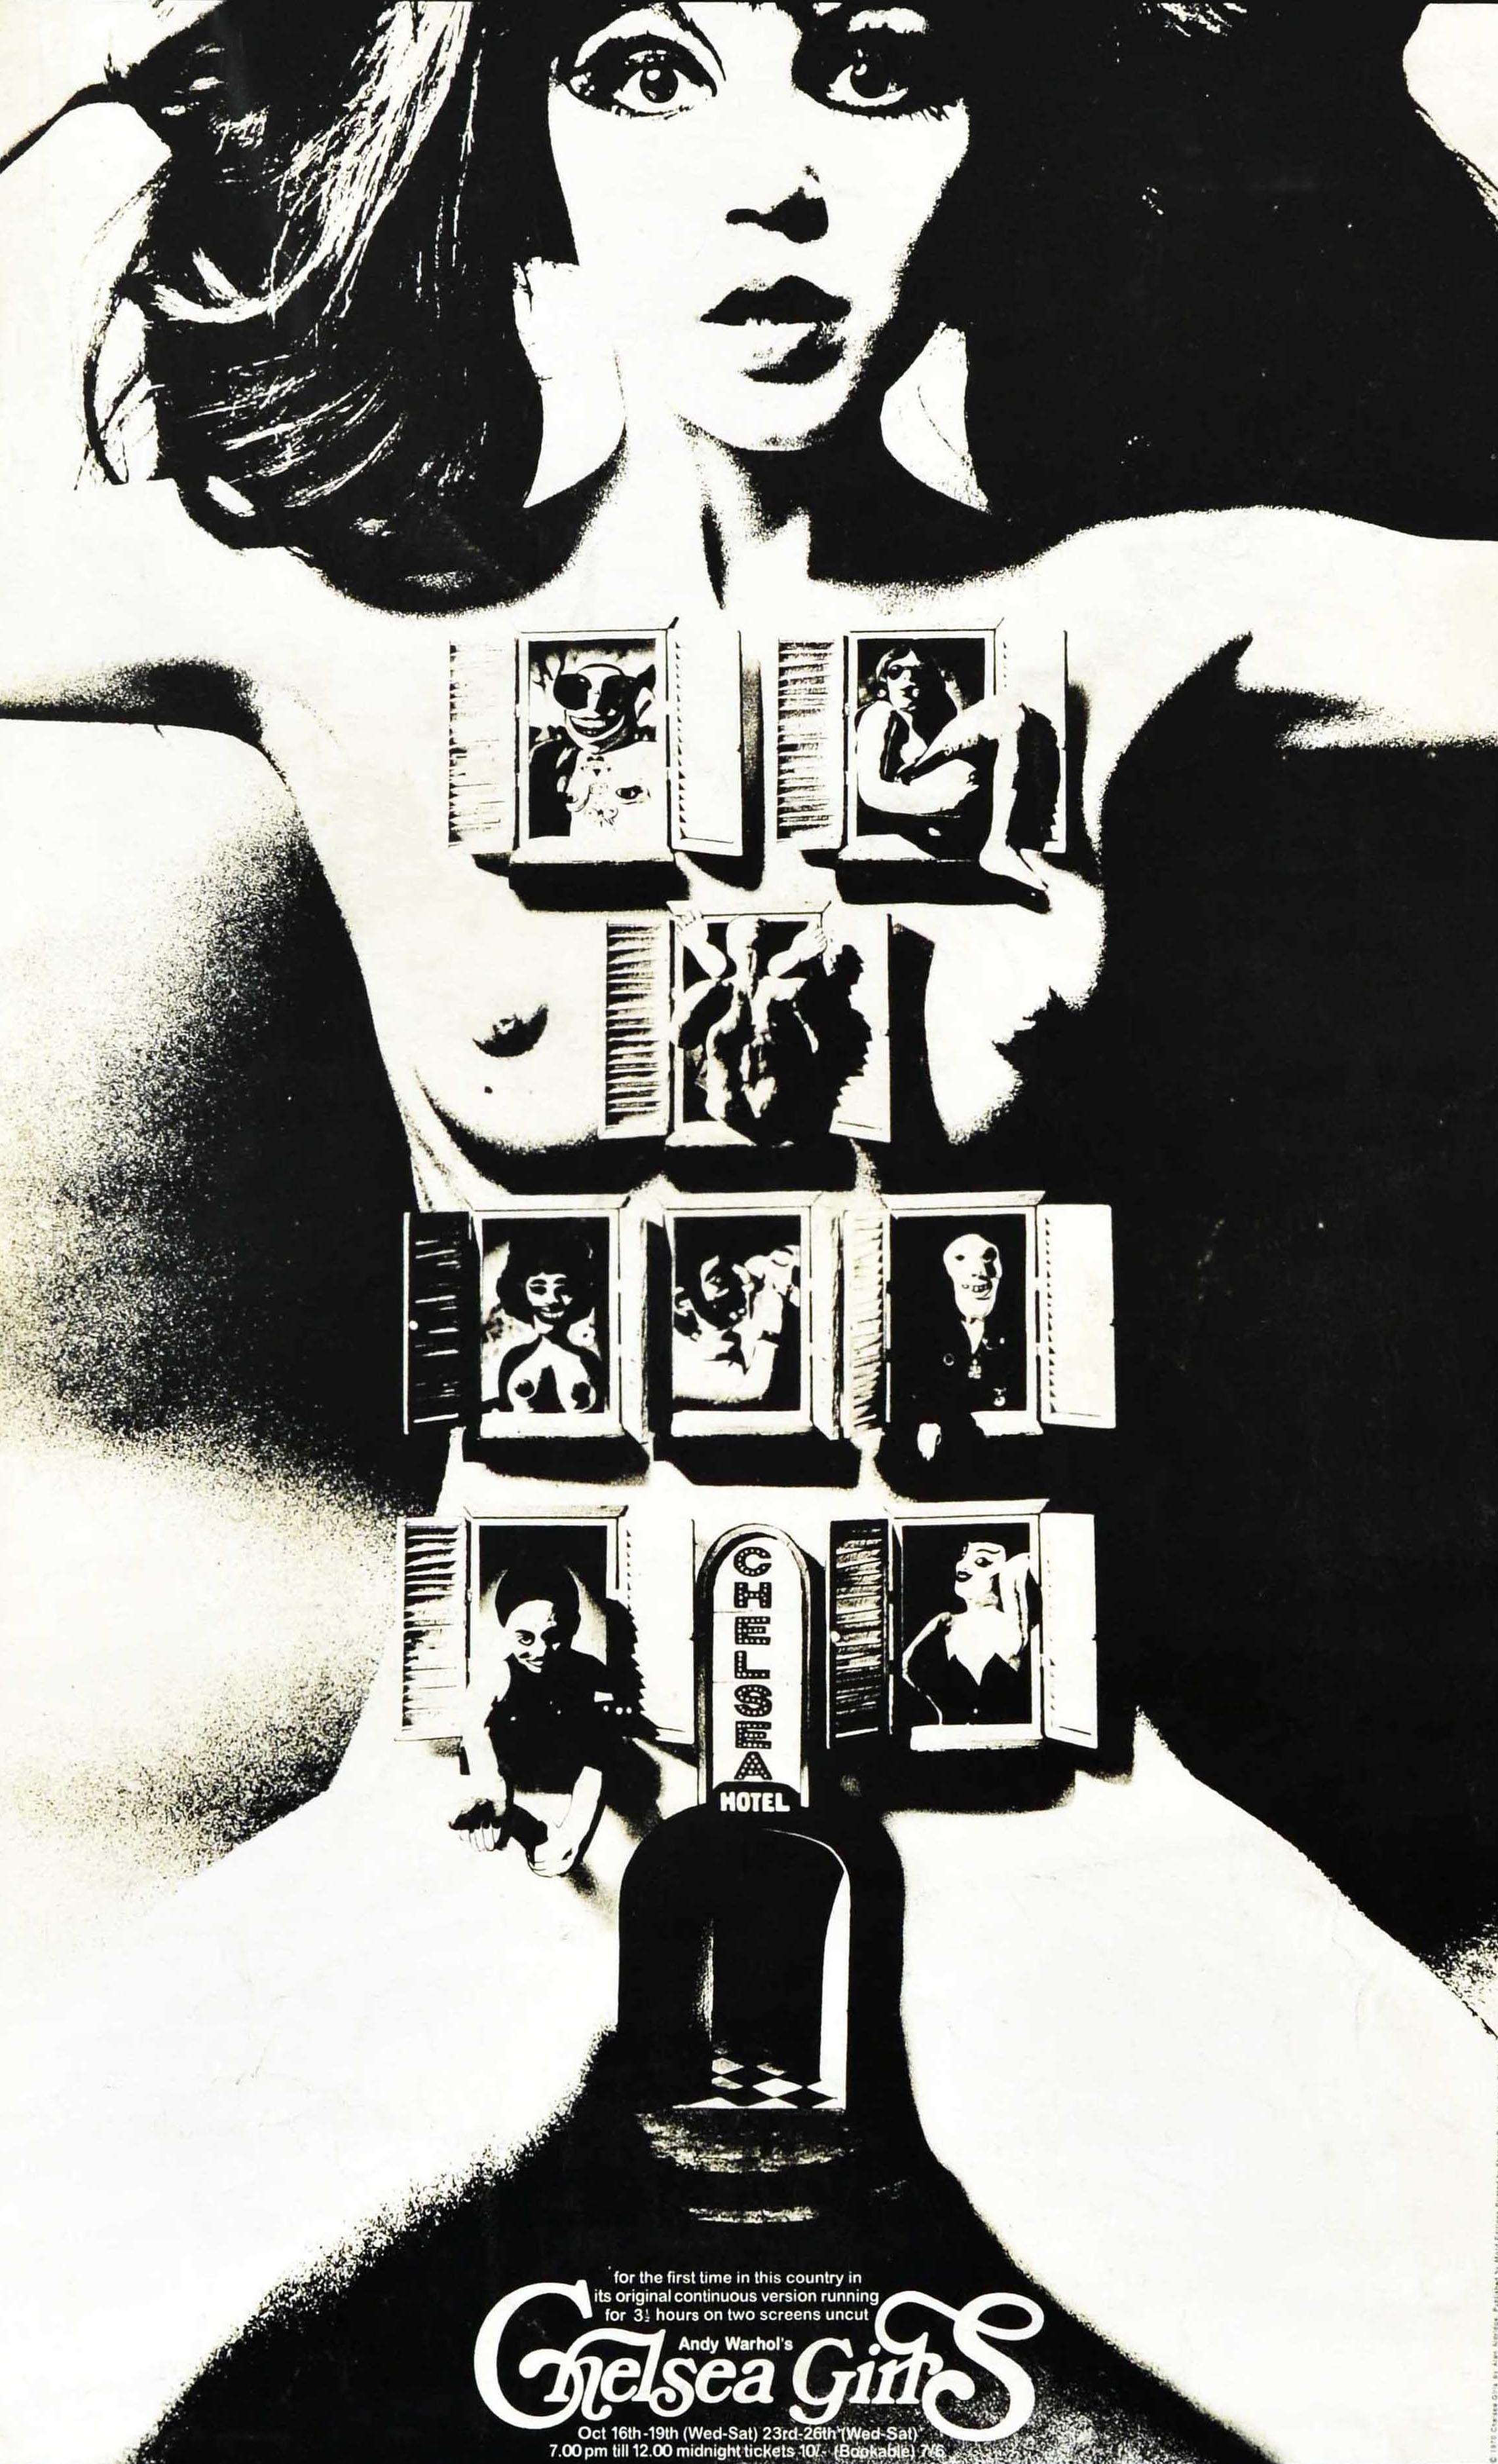 Original vintage arthouse cinema poster for the UK release of the 1966 experimental avant garde film directed by Andy Warhol (1928-1987) and Paul Morrissey (b 1938) - for the first time in this country in its original continuous version running for